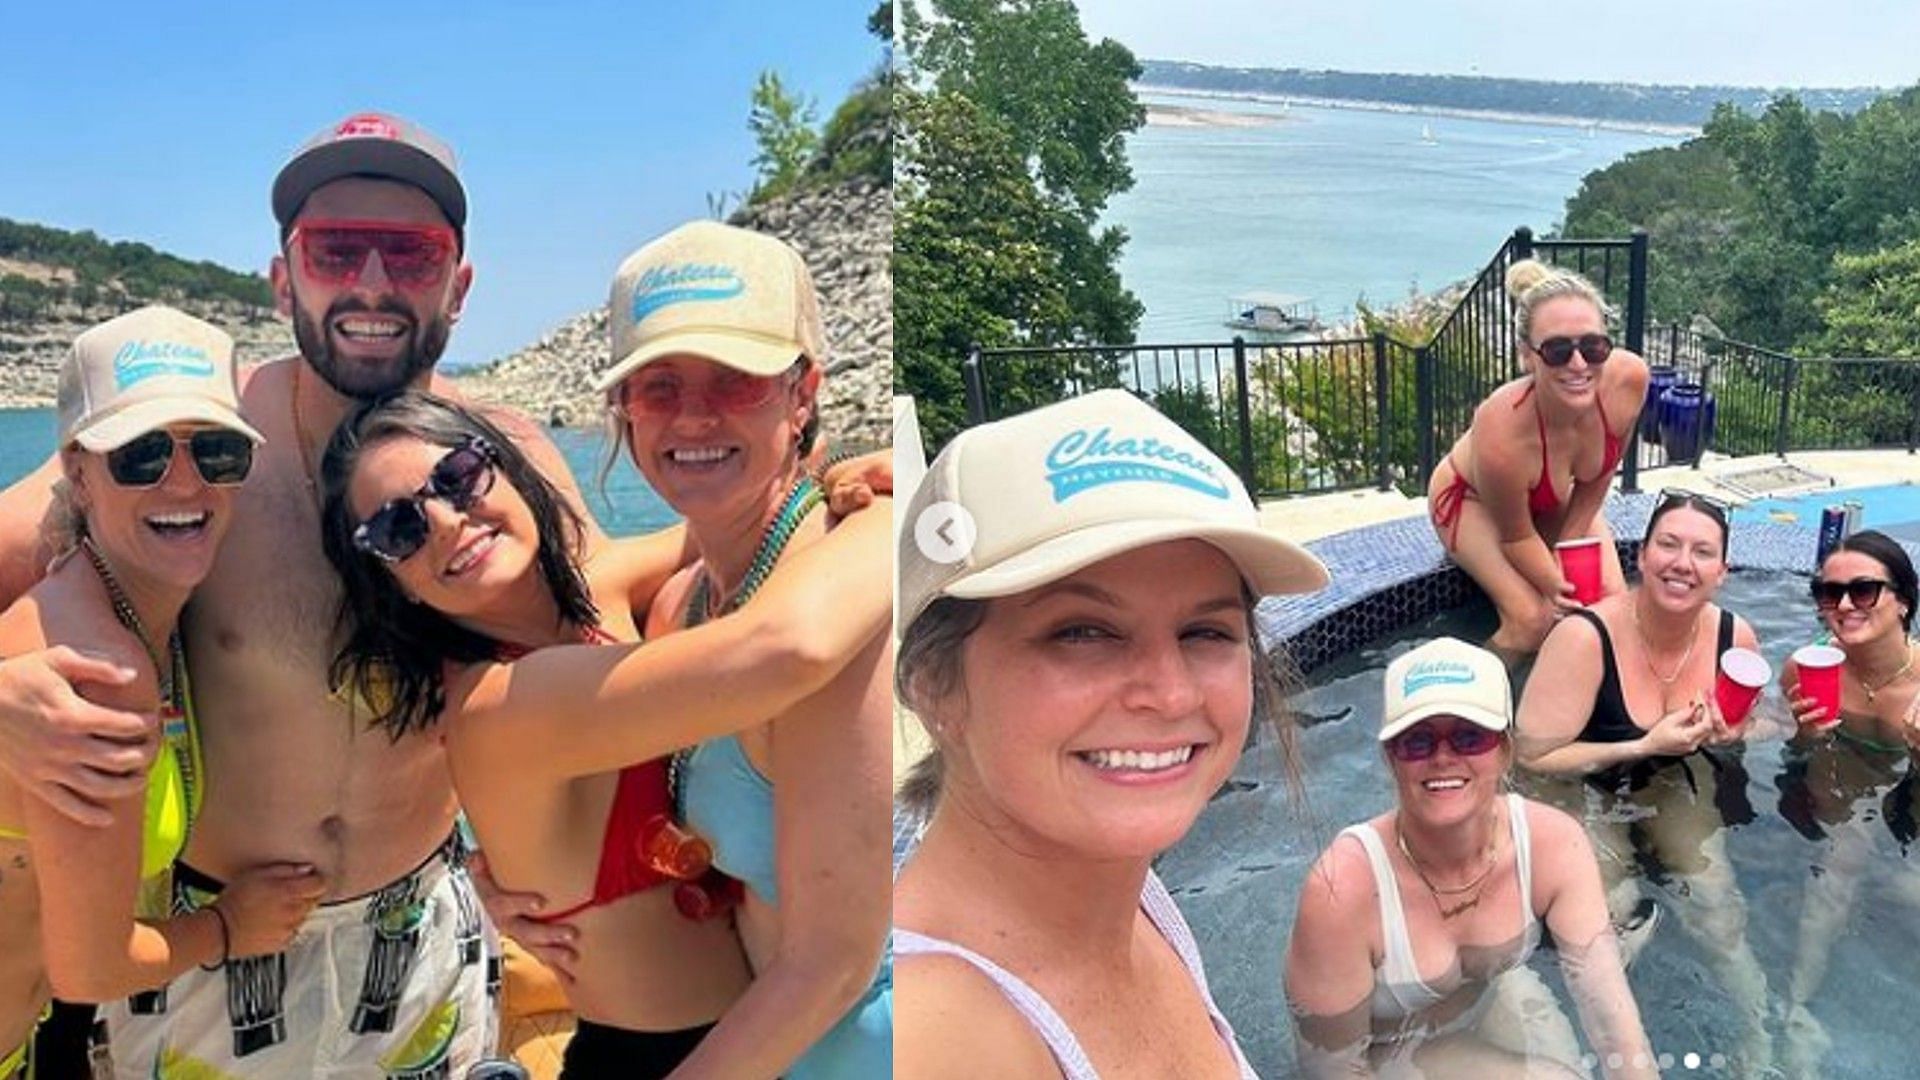 Baker and Emily Mayfield enjoy water-soaked getaway - Courtesy of Emily Mayfield on Instagram